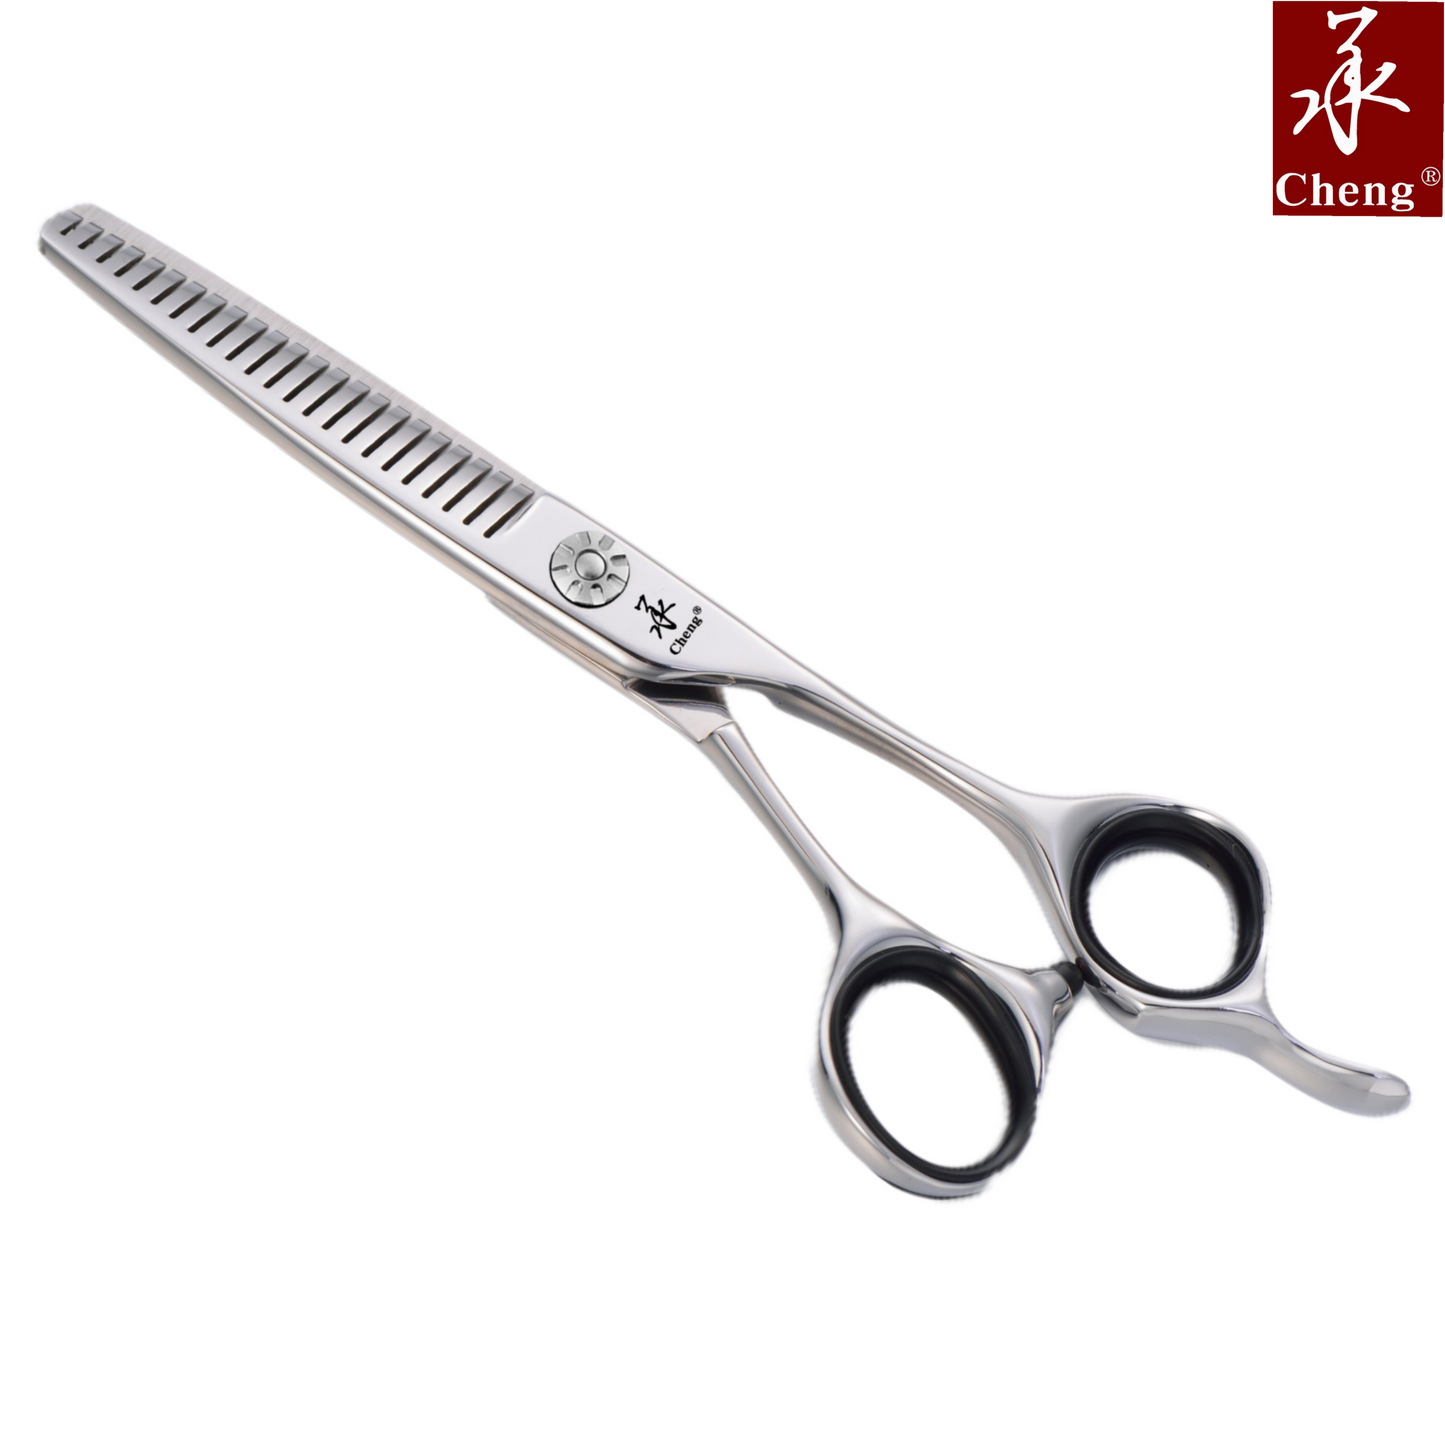 RA-625B Hair Thinning Scissors Professional Hairdressing Shear 6.0Inch 25T About=25%